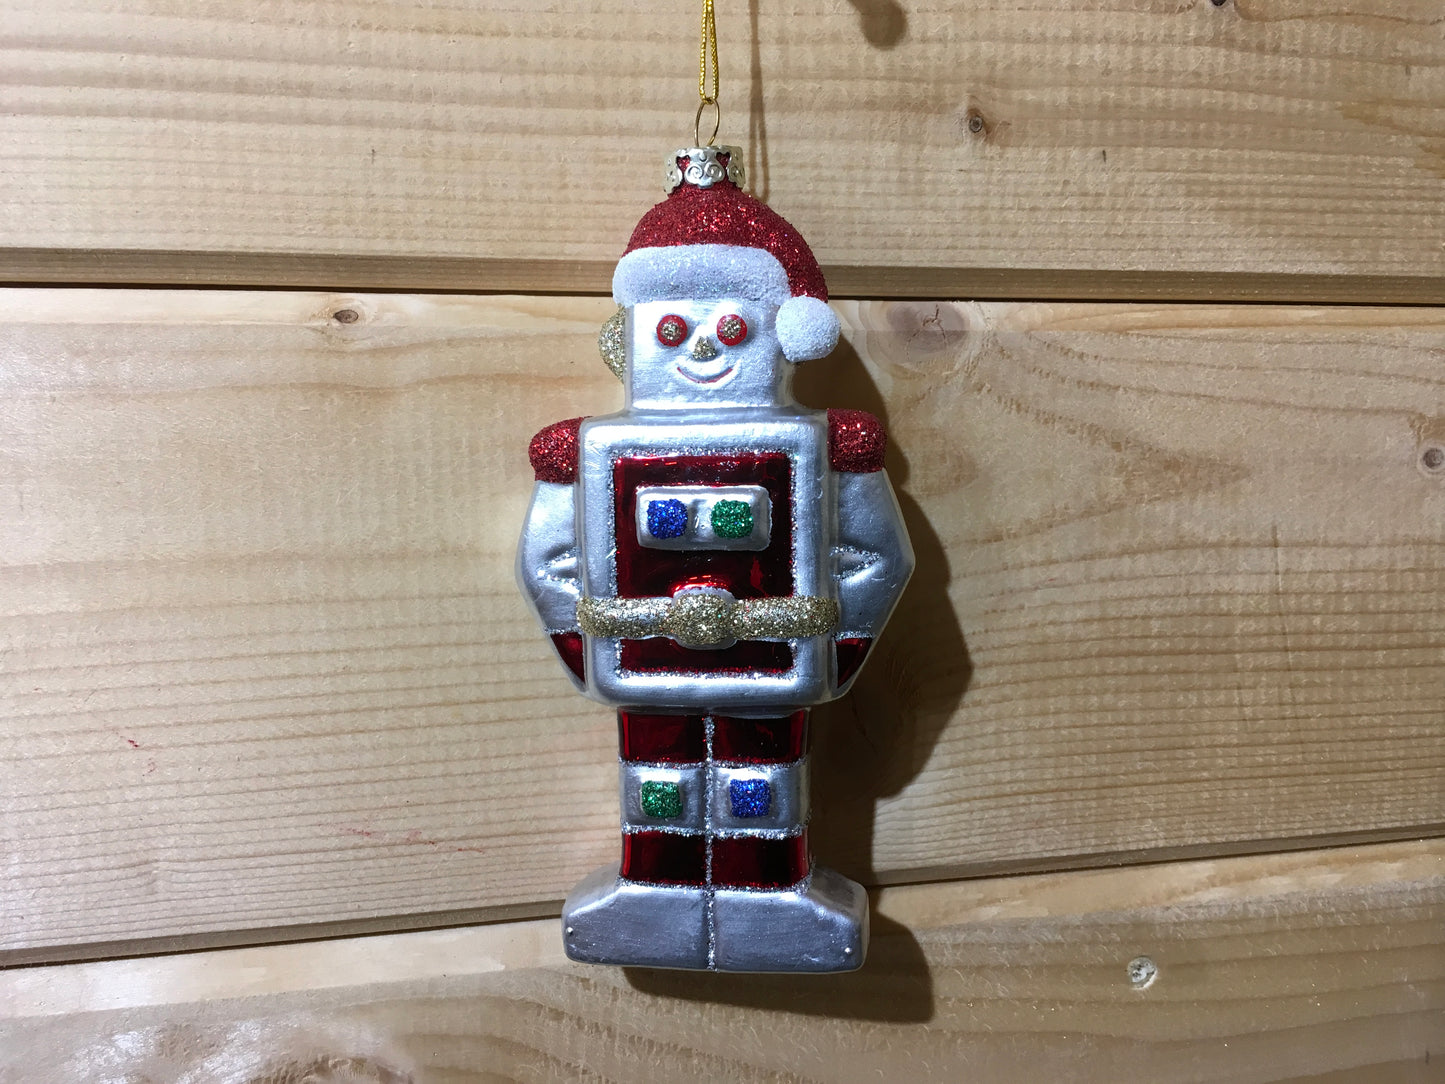 Festive red and silver robot in a Santa costume, hanging decoration for your Christmas Tree.